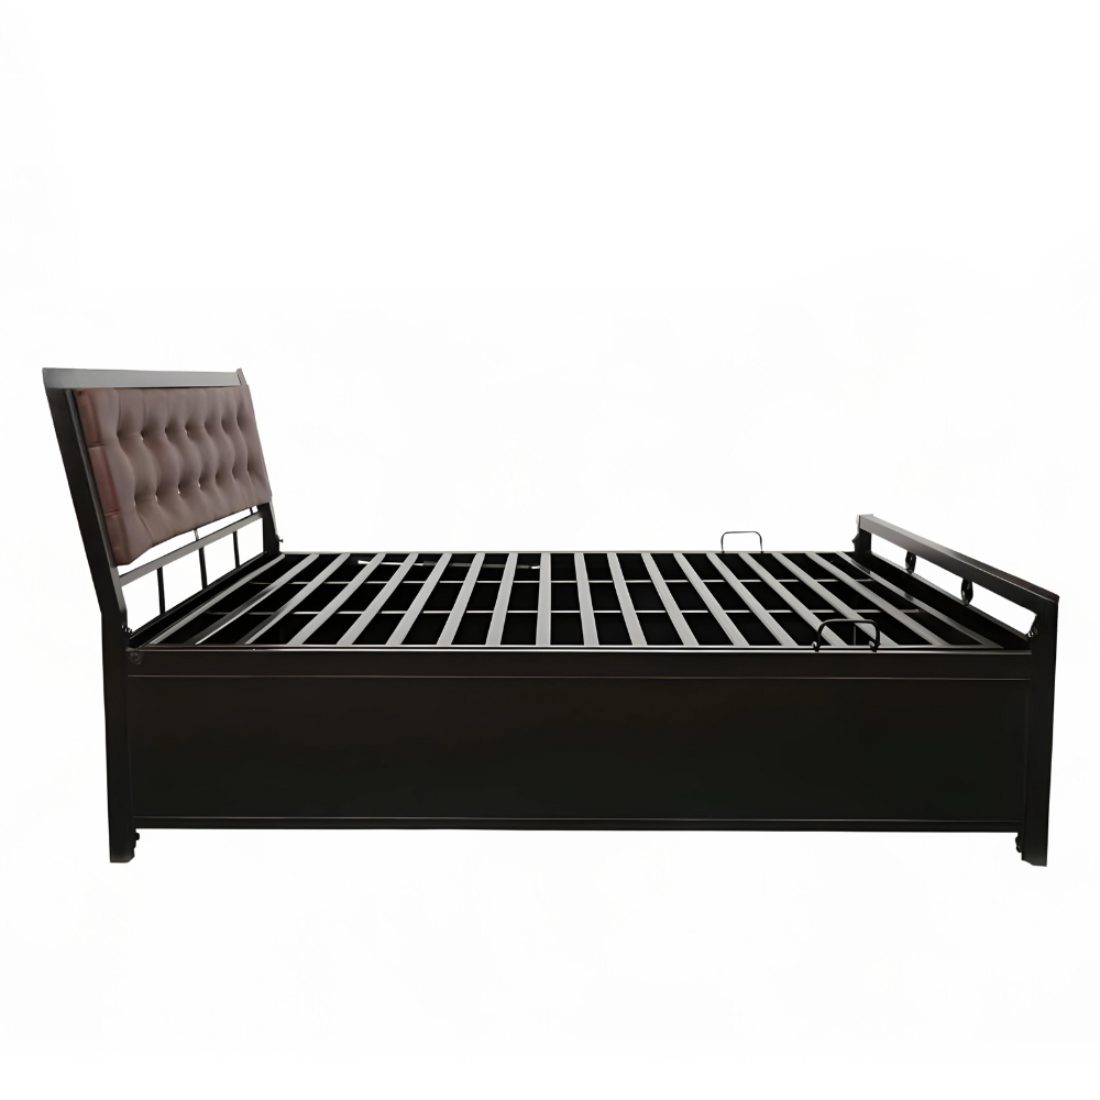 Heath Hydraulic Storage Queen Metal Bed with Brown Cushion Headrest (Color - Black)